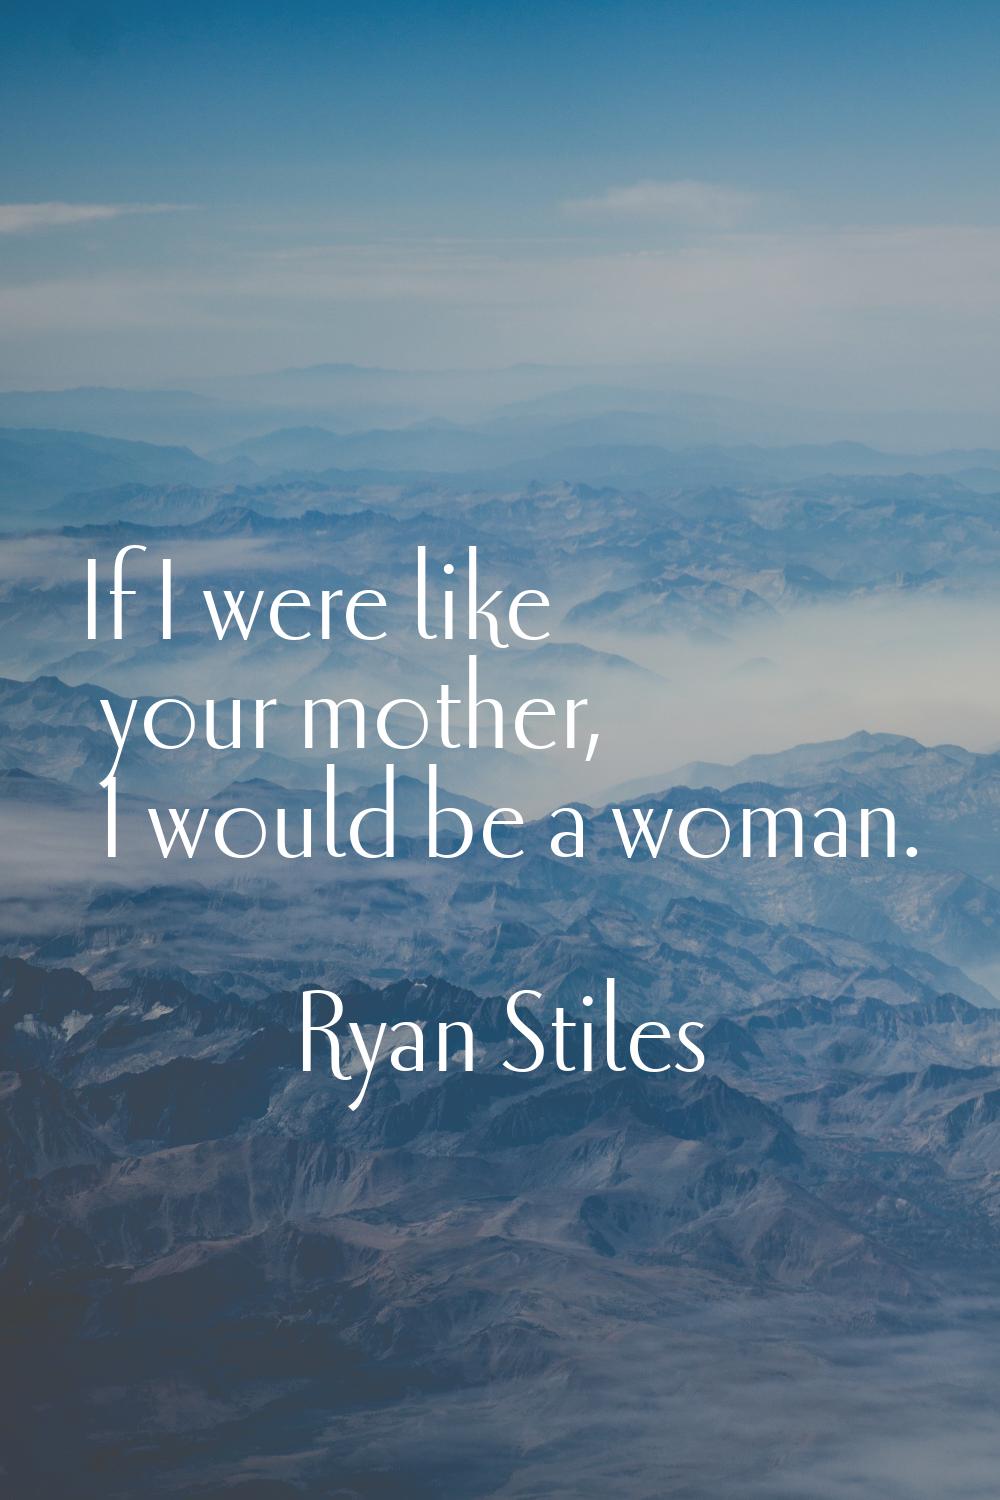 If I were like your mother, I would be a woman.